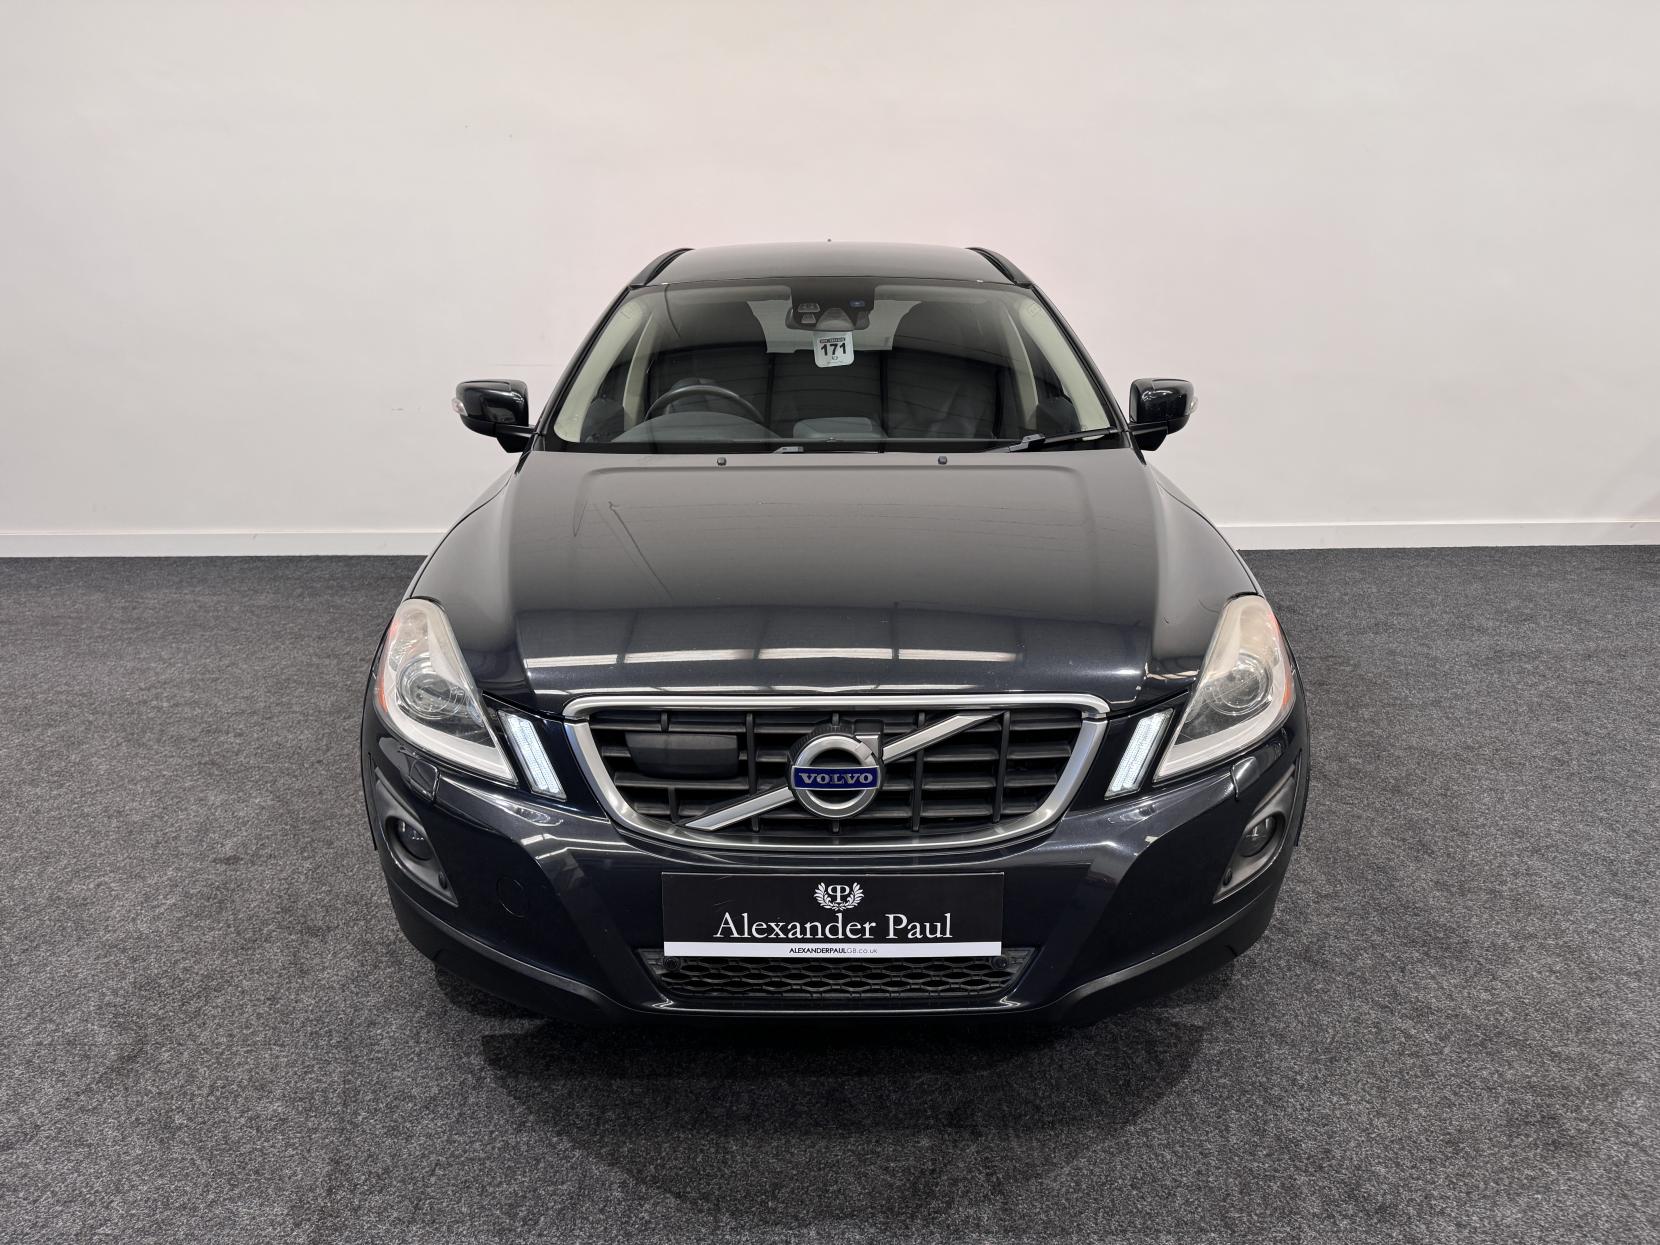 Volvo XC60 2.4 D5 SE Lux SUV 5dr Diesel Geartronic AWD Euro 4 (185 ps)